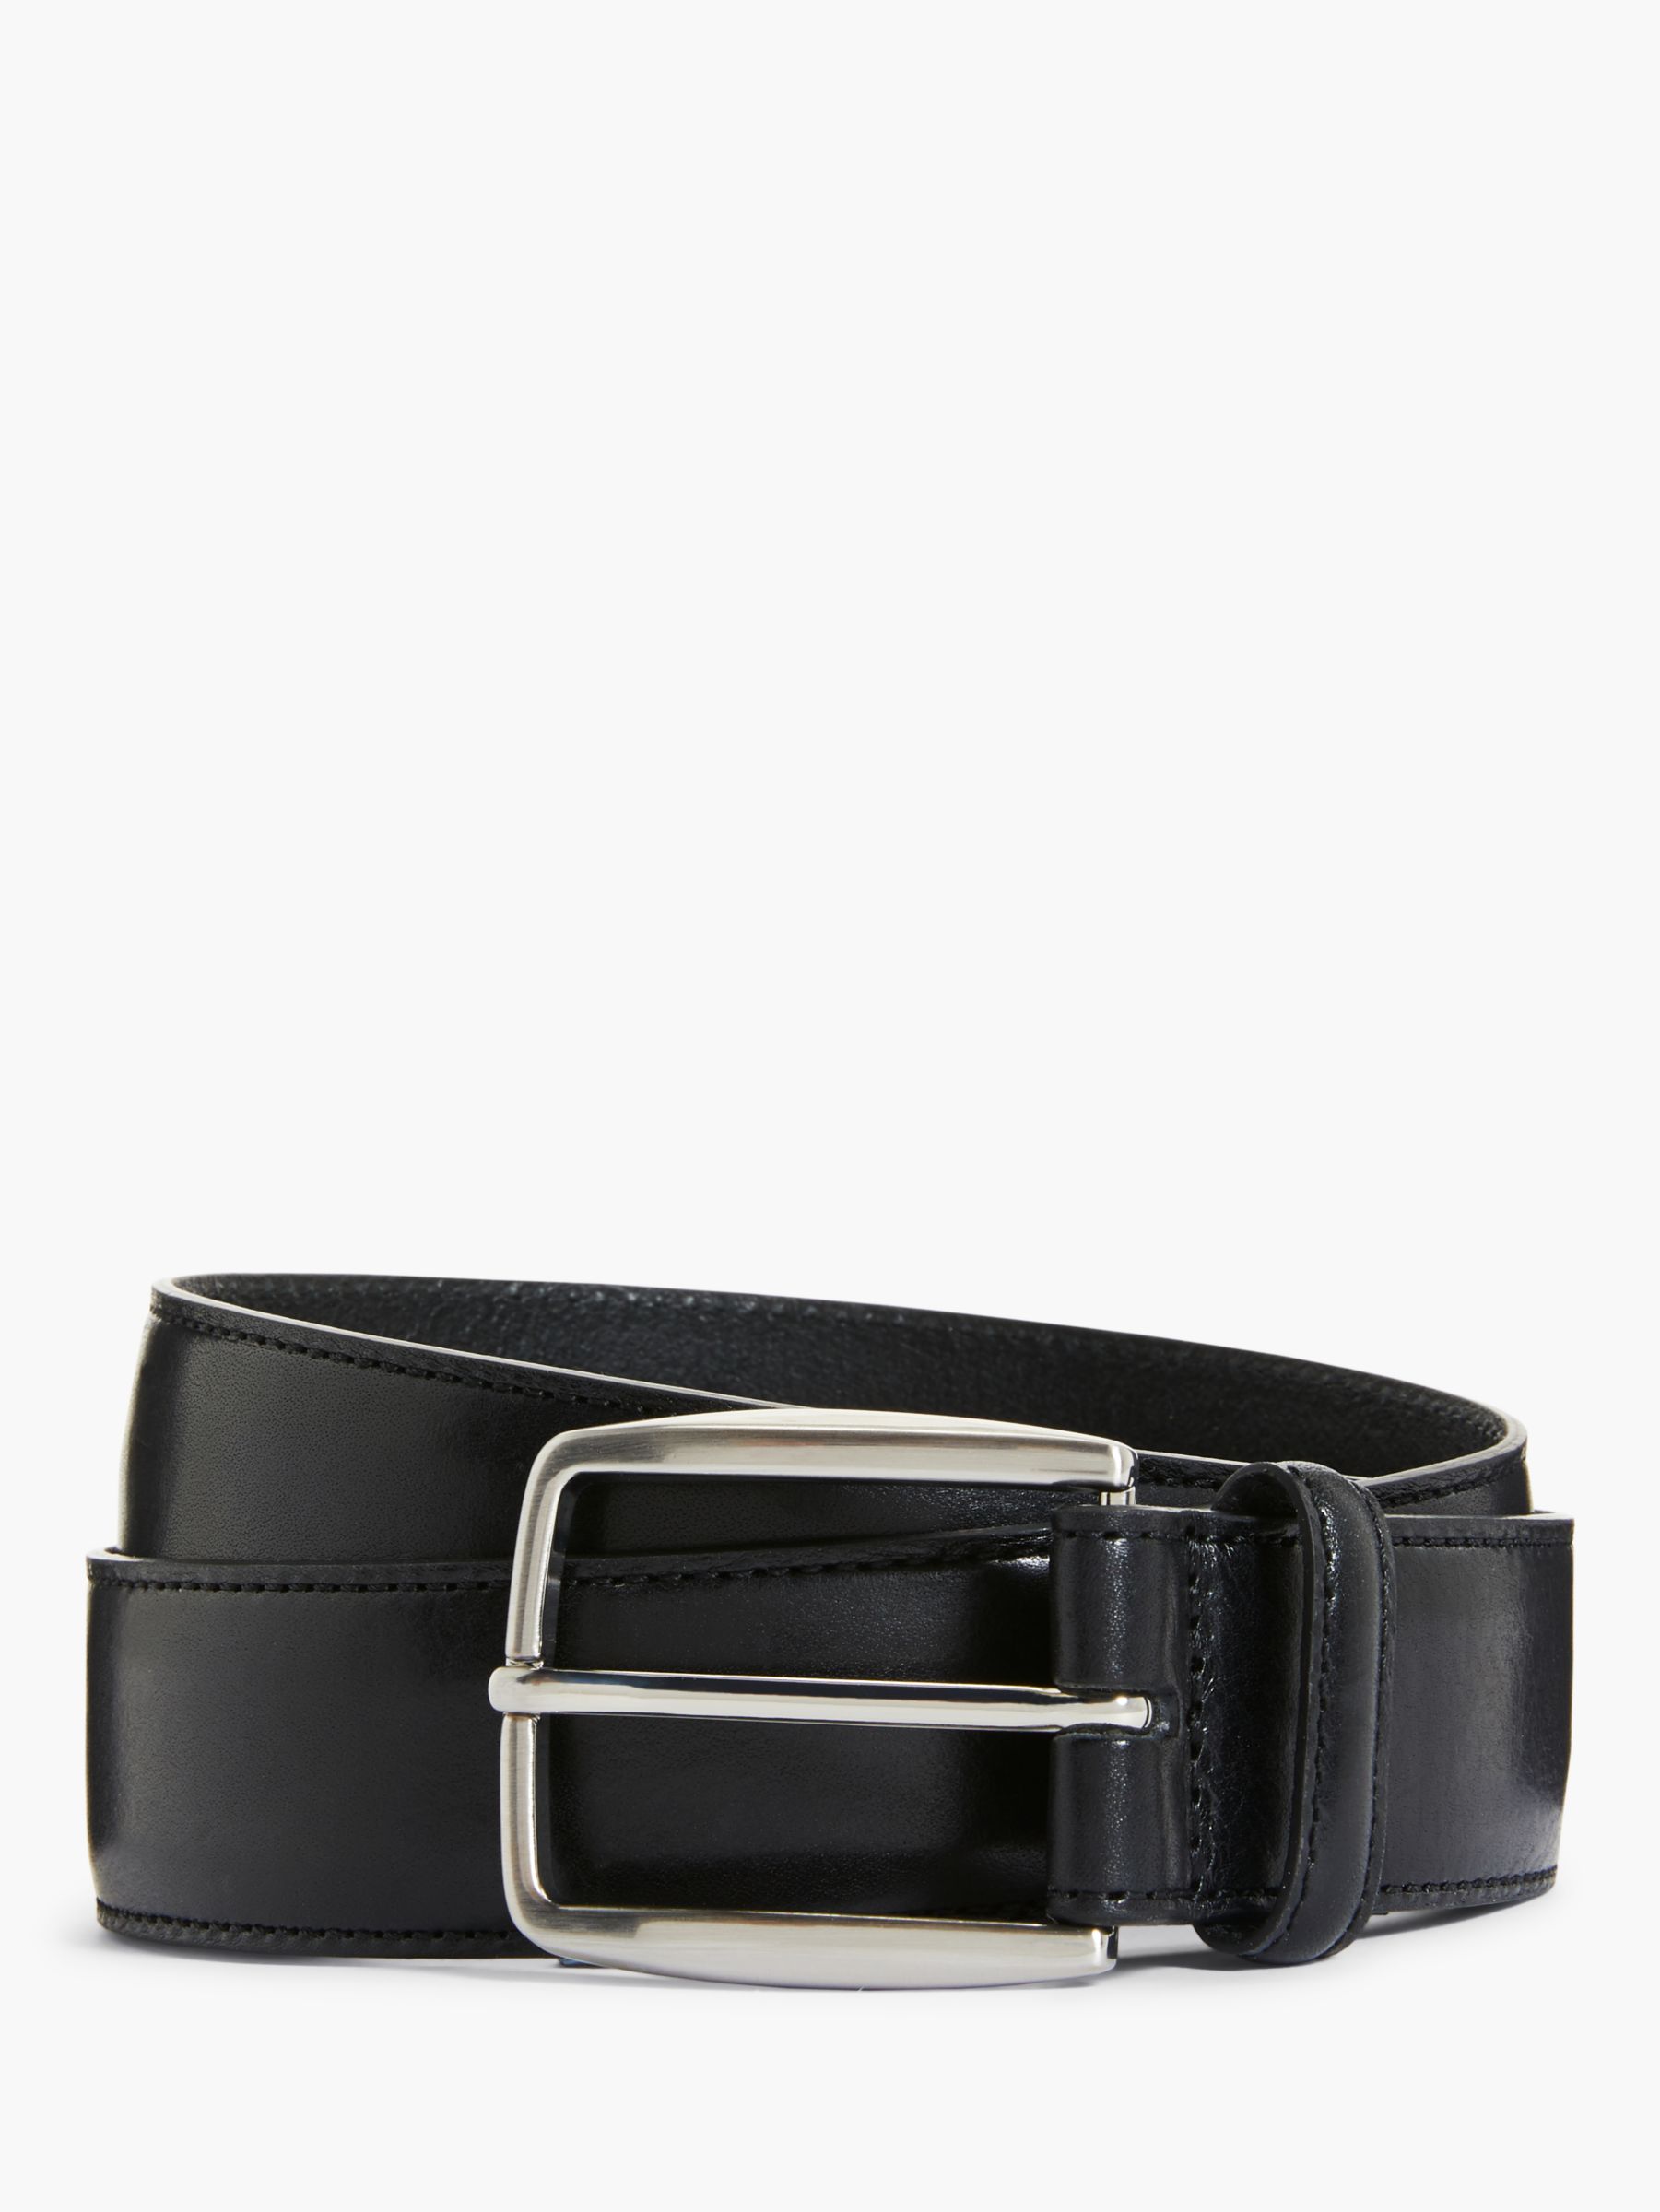 John Lewis Made in Italy 35mm Stitched Leather Belt, Black, XL